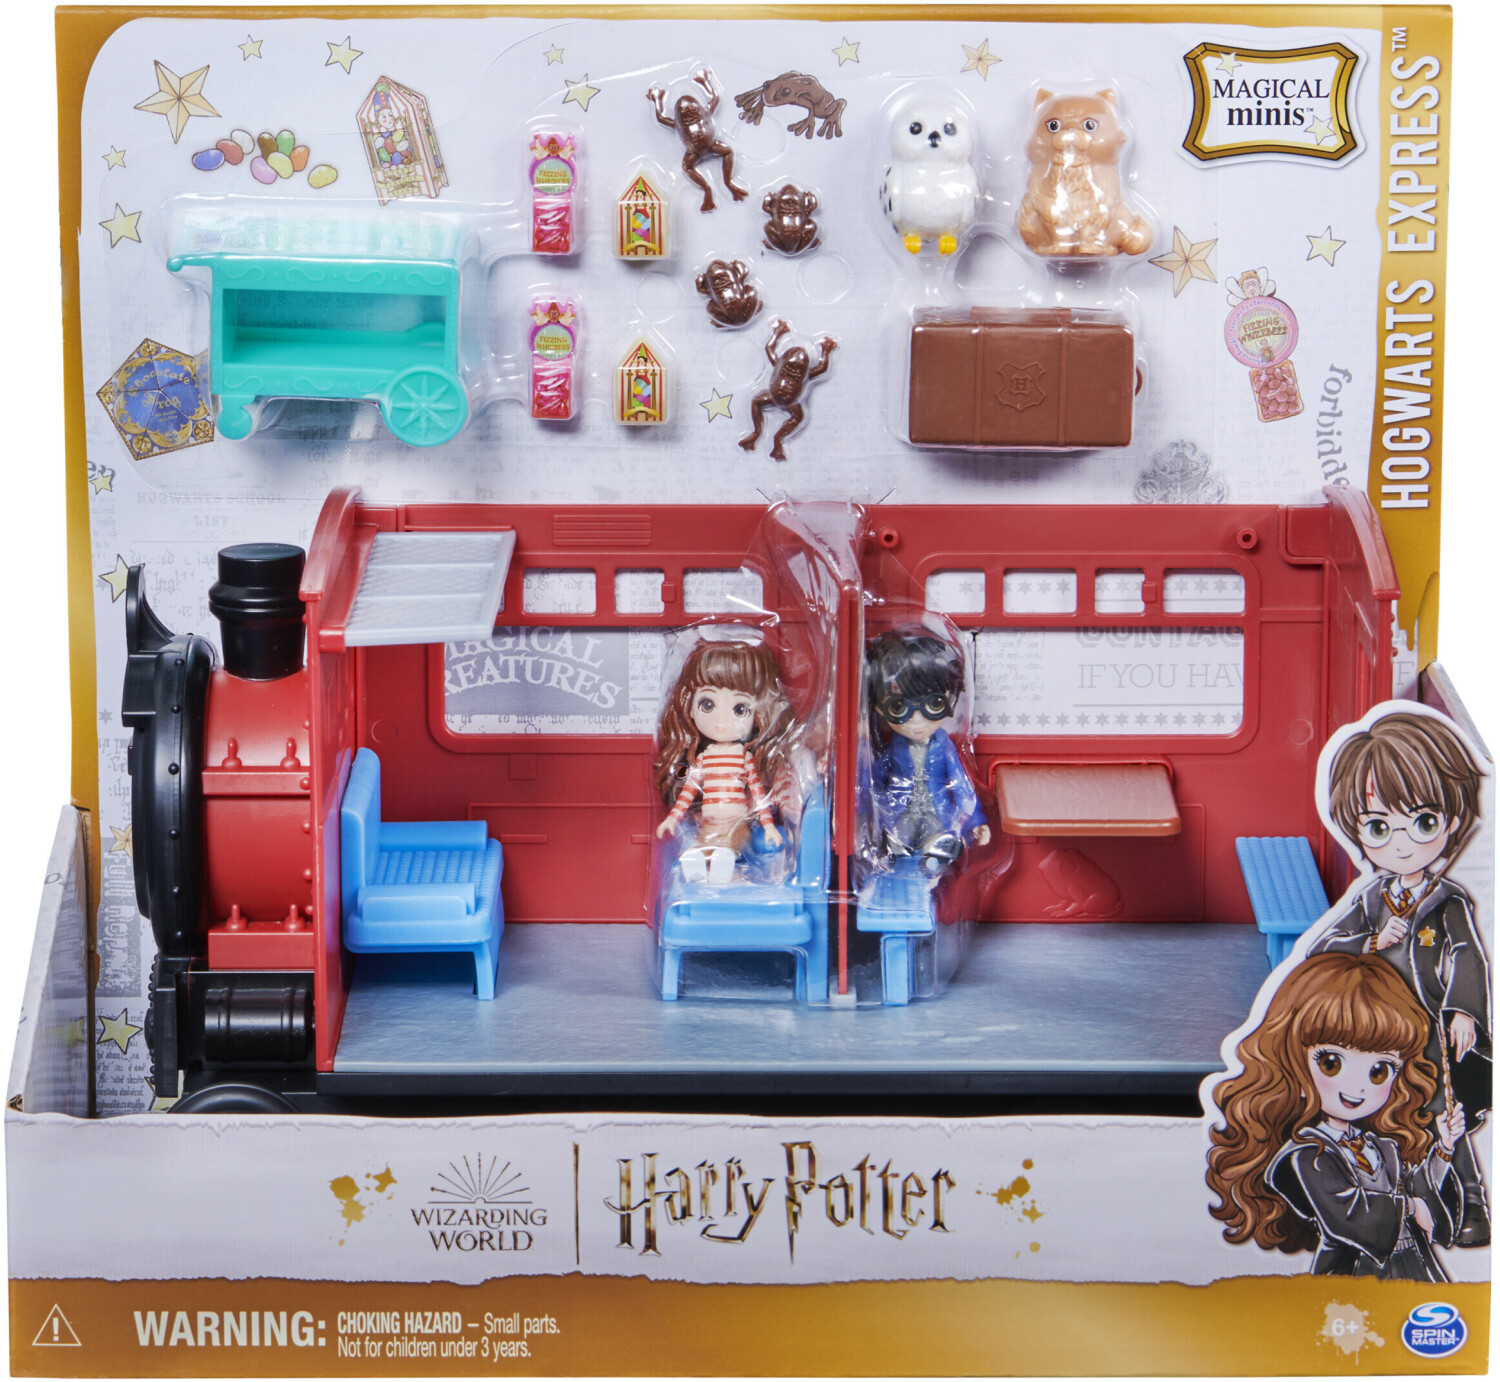 Spin Master Wizarding World Harry Potter - Hogwarts Express Train Playset Toy Figure (with Hermione Granger and Harry Potter Collectible Fig bērnu rotaļlieta